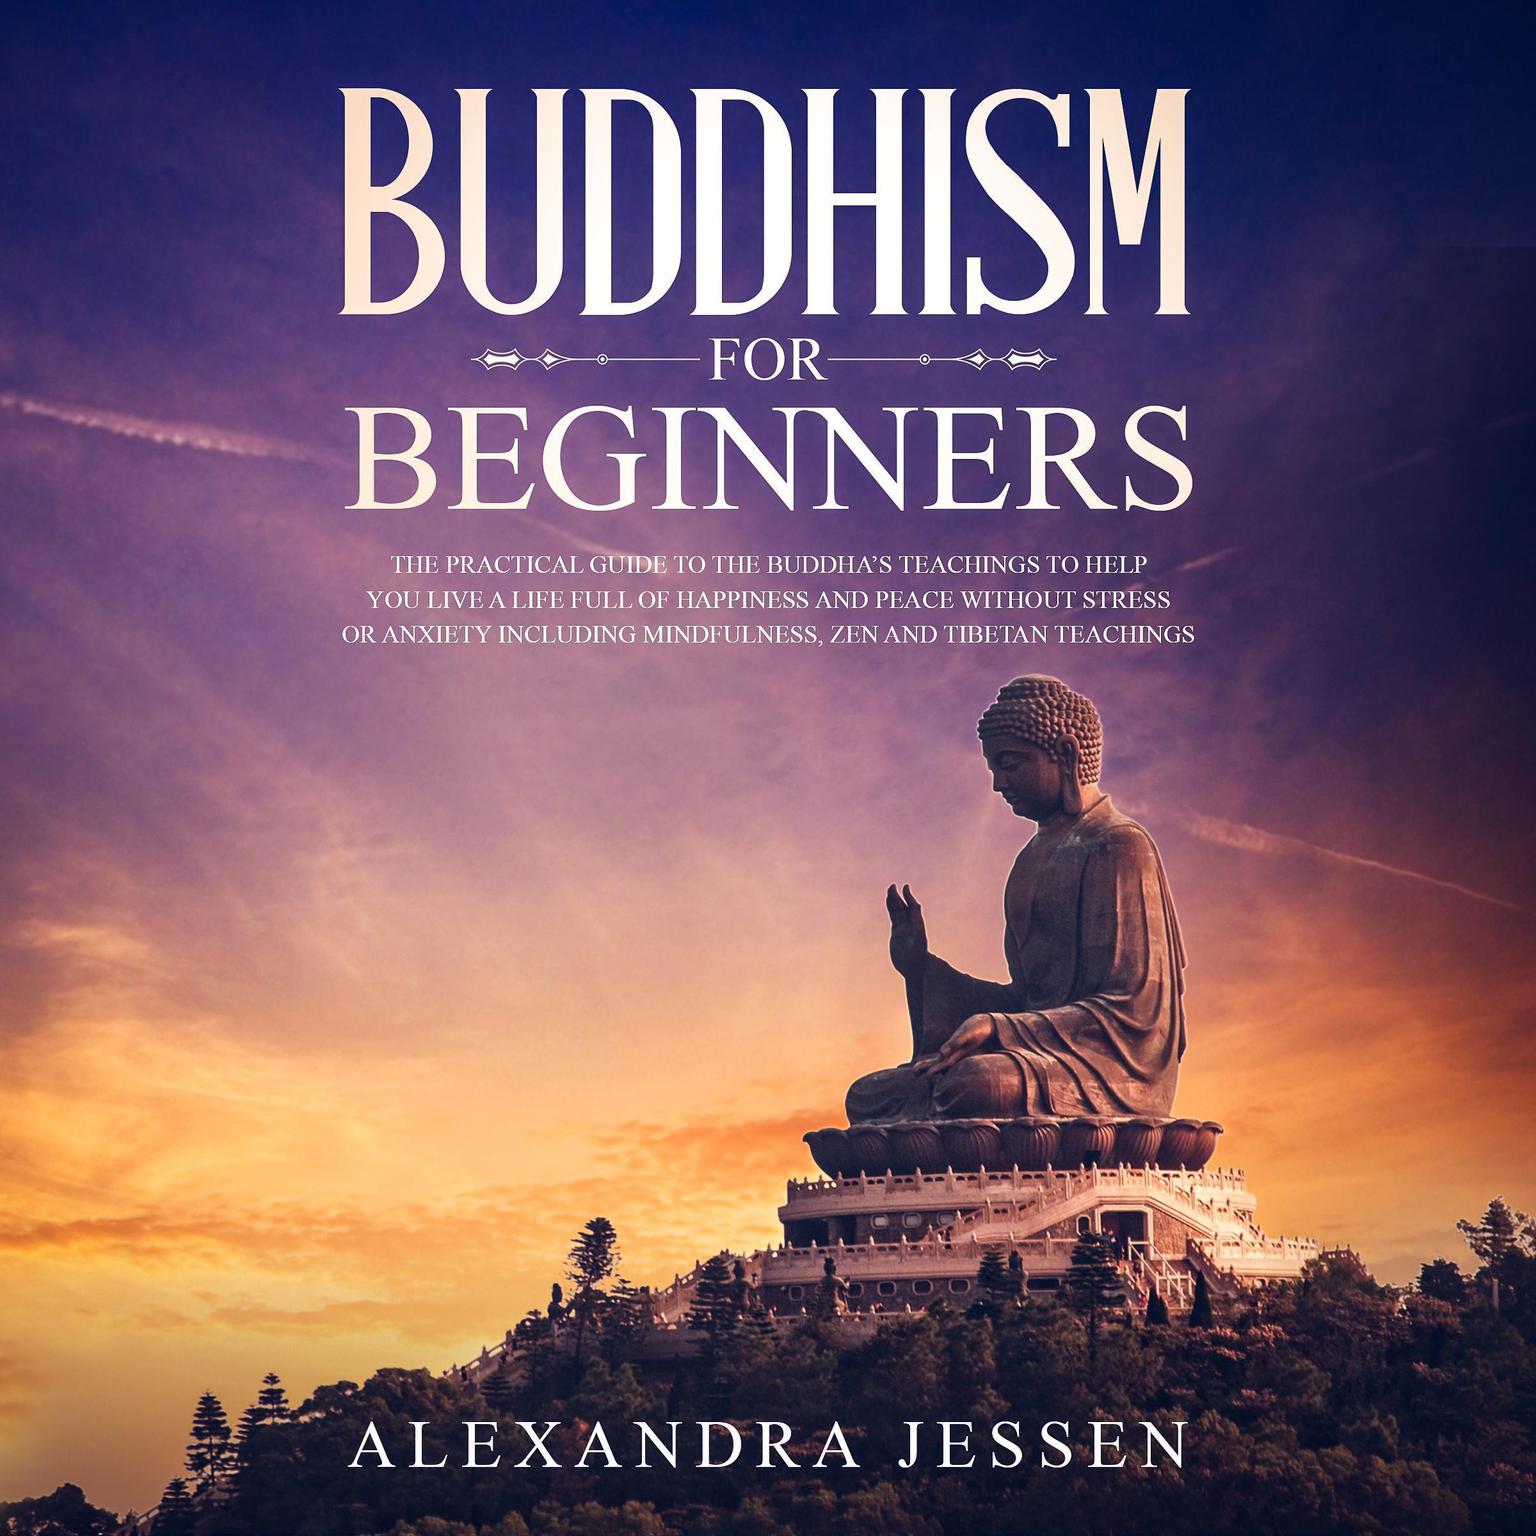 Buddhism for Beginners: The Practical Guide to the Buddha’s Teachings to Help You Live a Life Full of Happiness and Peace without Stress or Anxiety, Including Mindfulness, Zen, and Tibetan Teachings Audiobook, by Alexandra Jessen